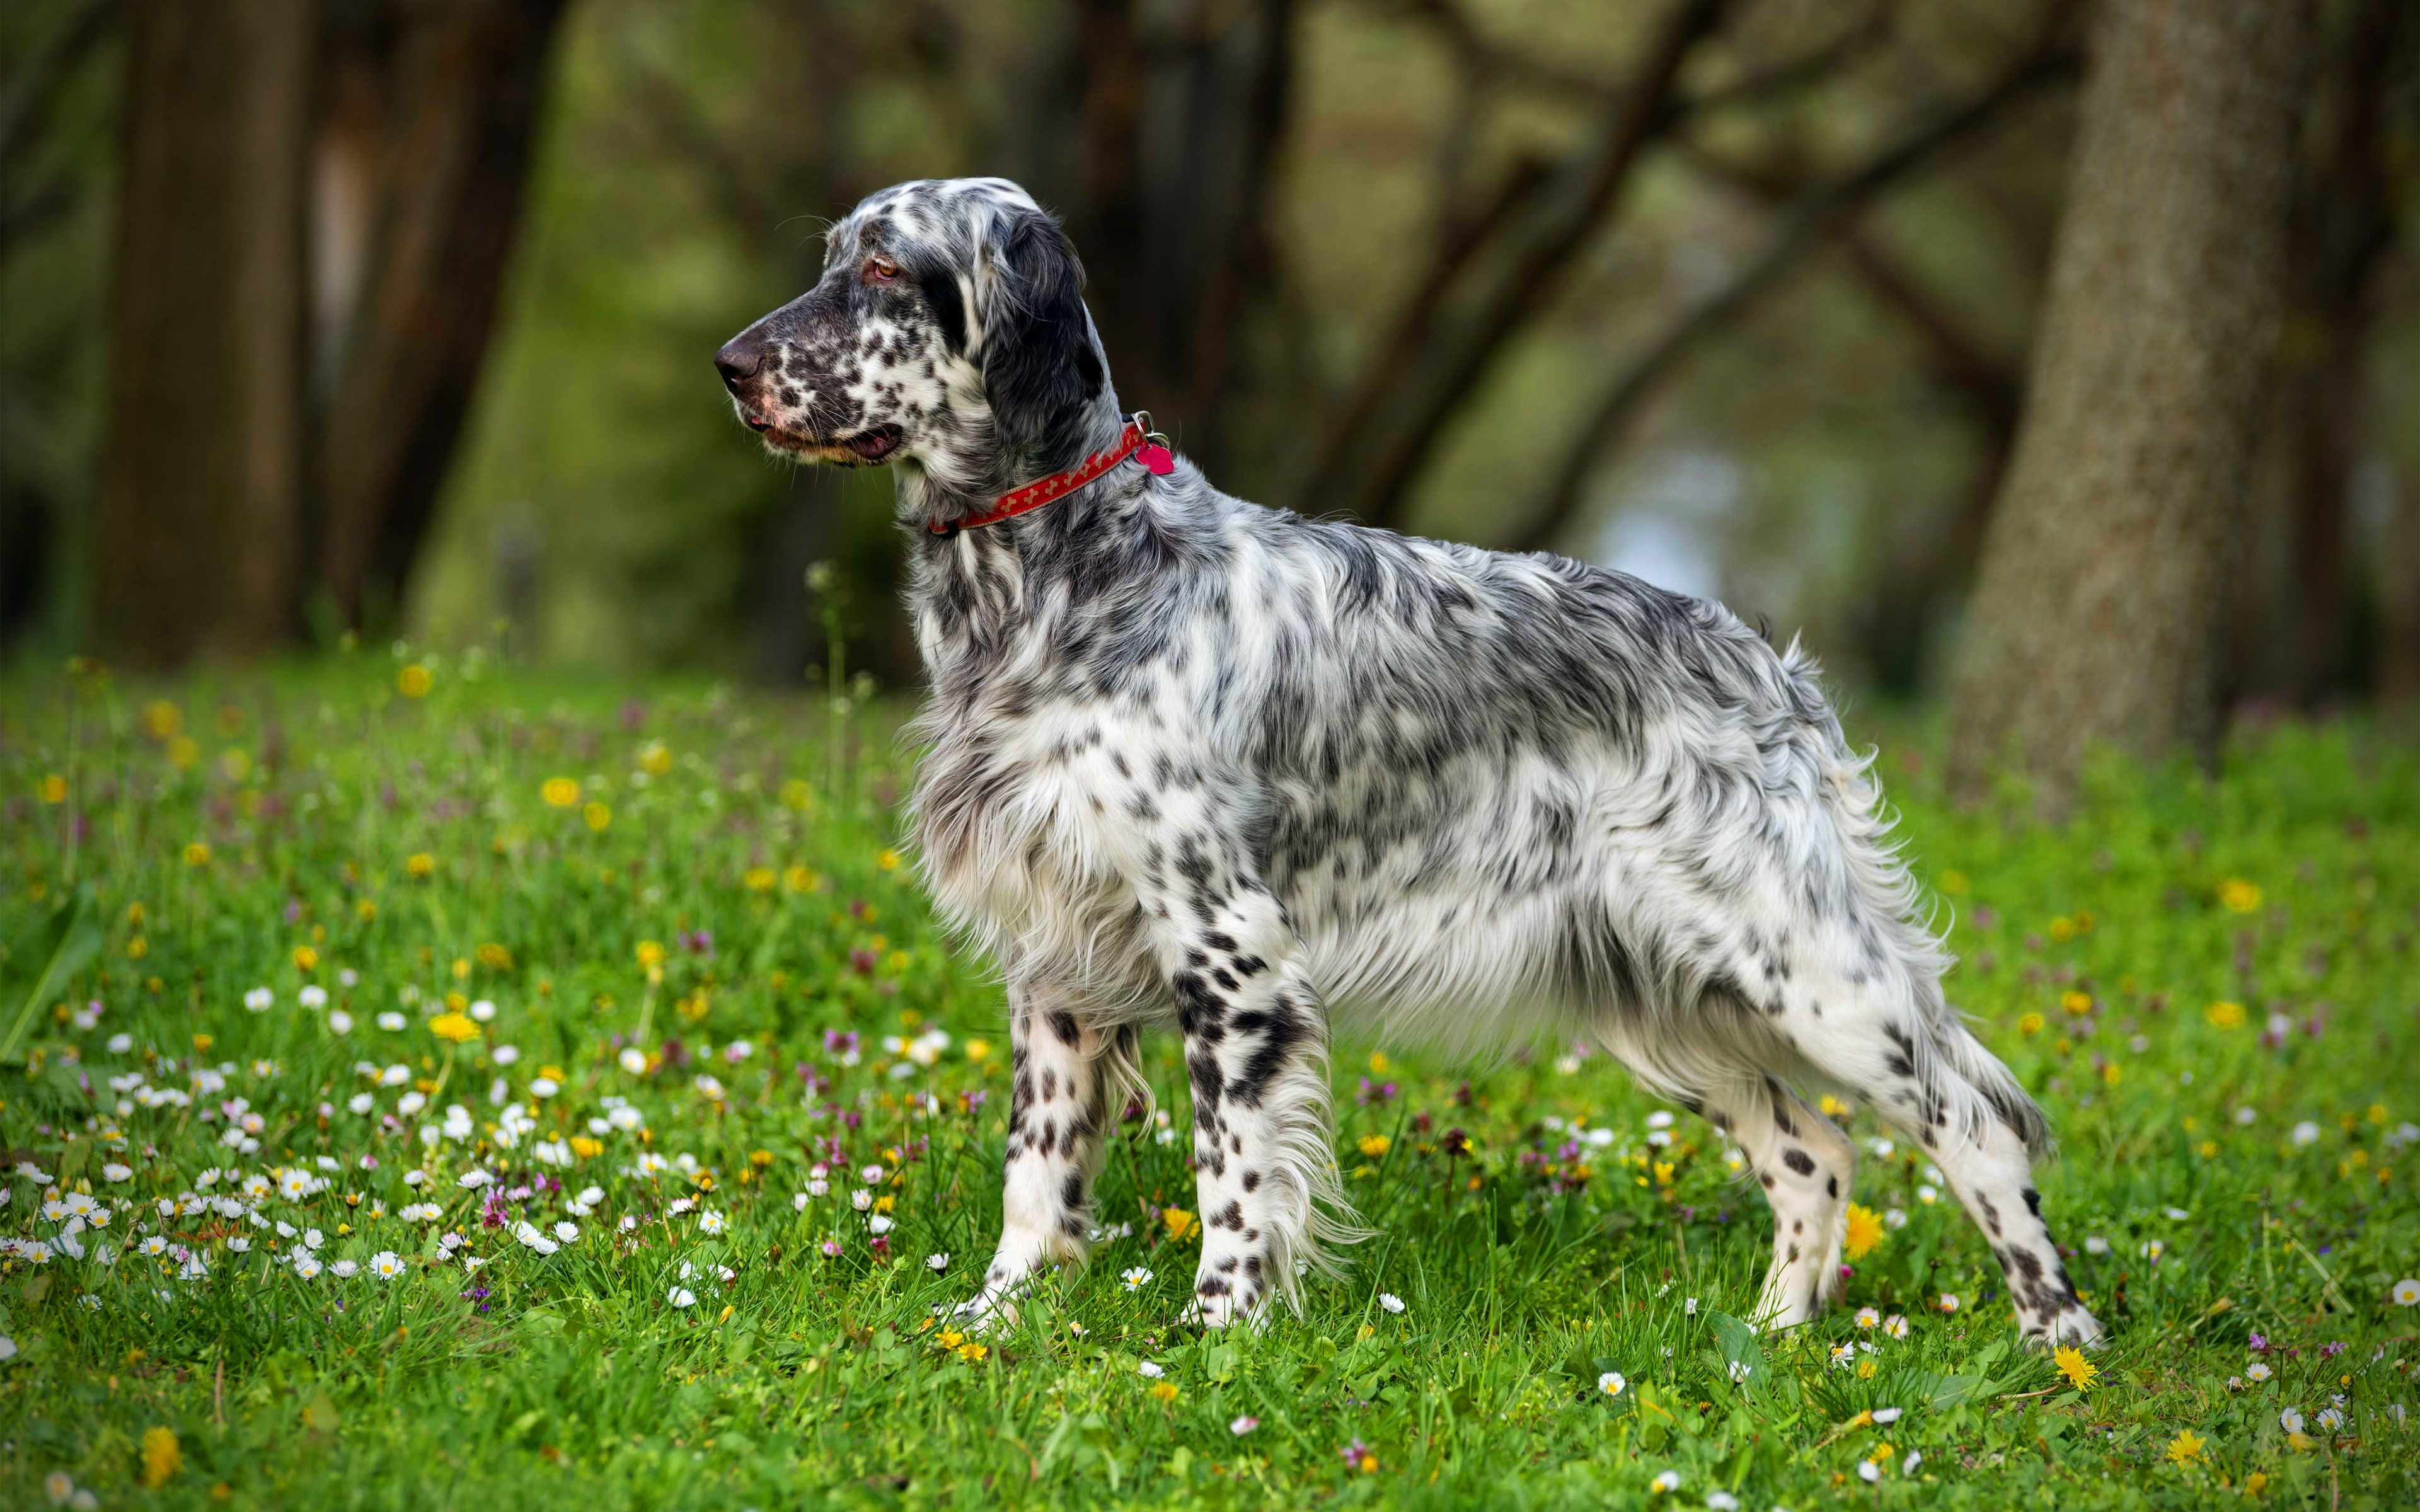 Download wallpaper English Setter, 4k, lawn, pets, dogs, cute animals, English Setter Dog for desktop with resolution 3840x2400. High Quality HD picture wallpaper